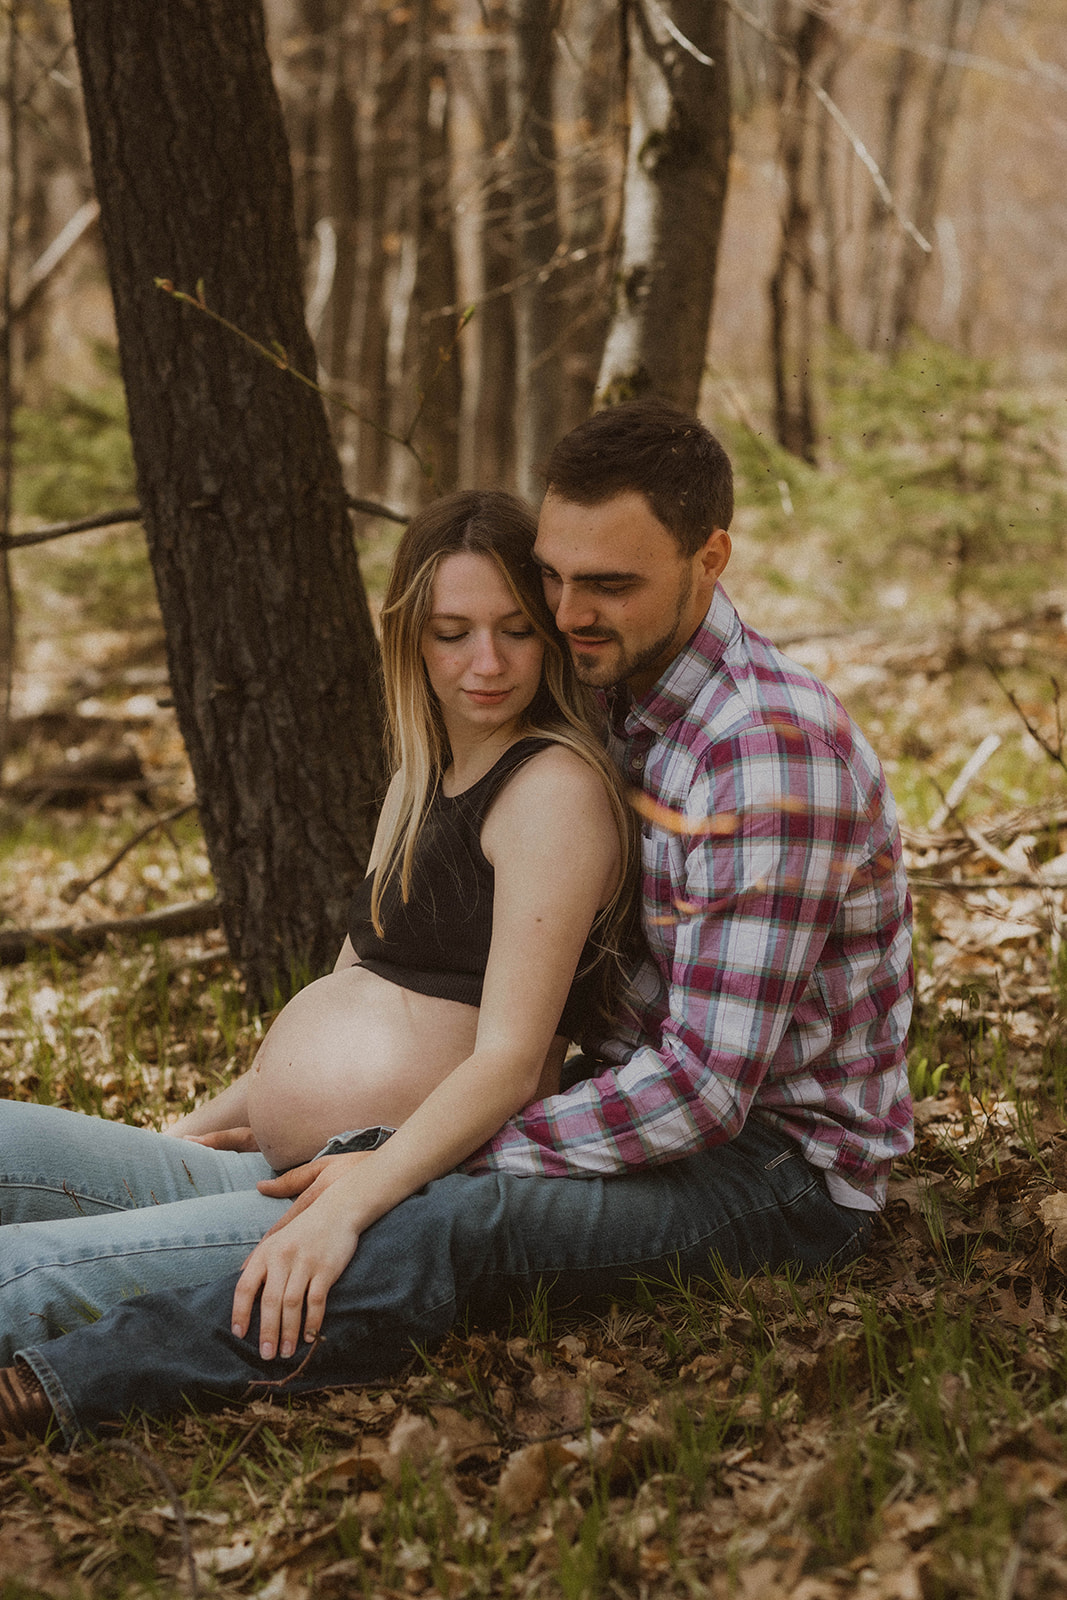 Future parents pose intimately together during their western maternity photos